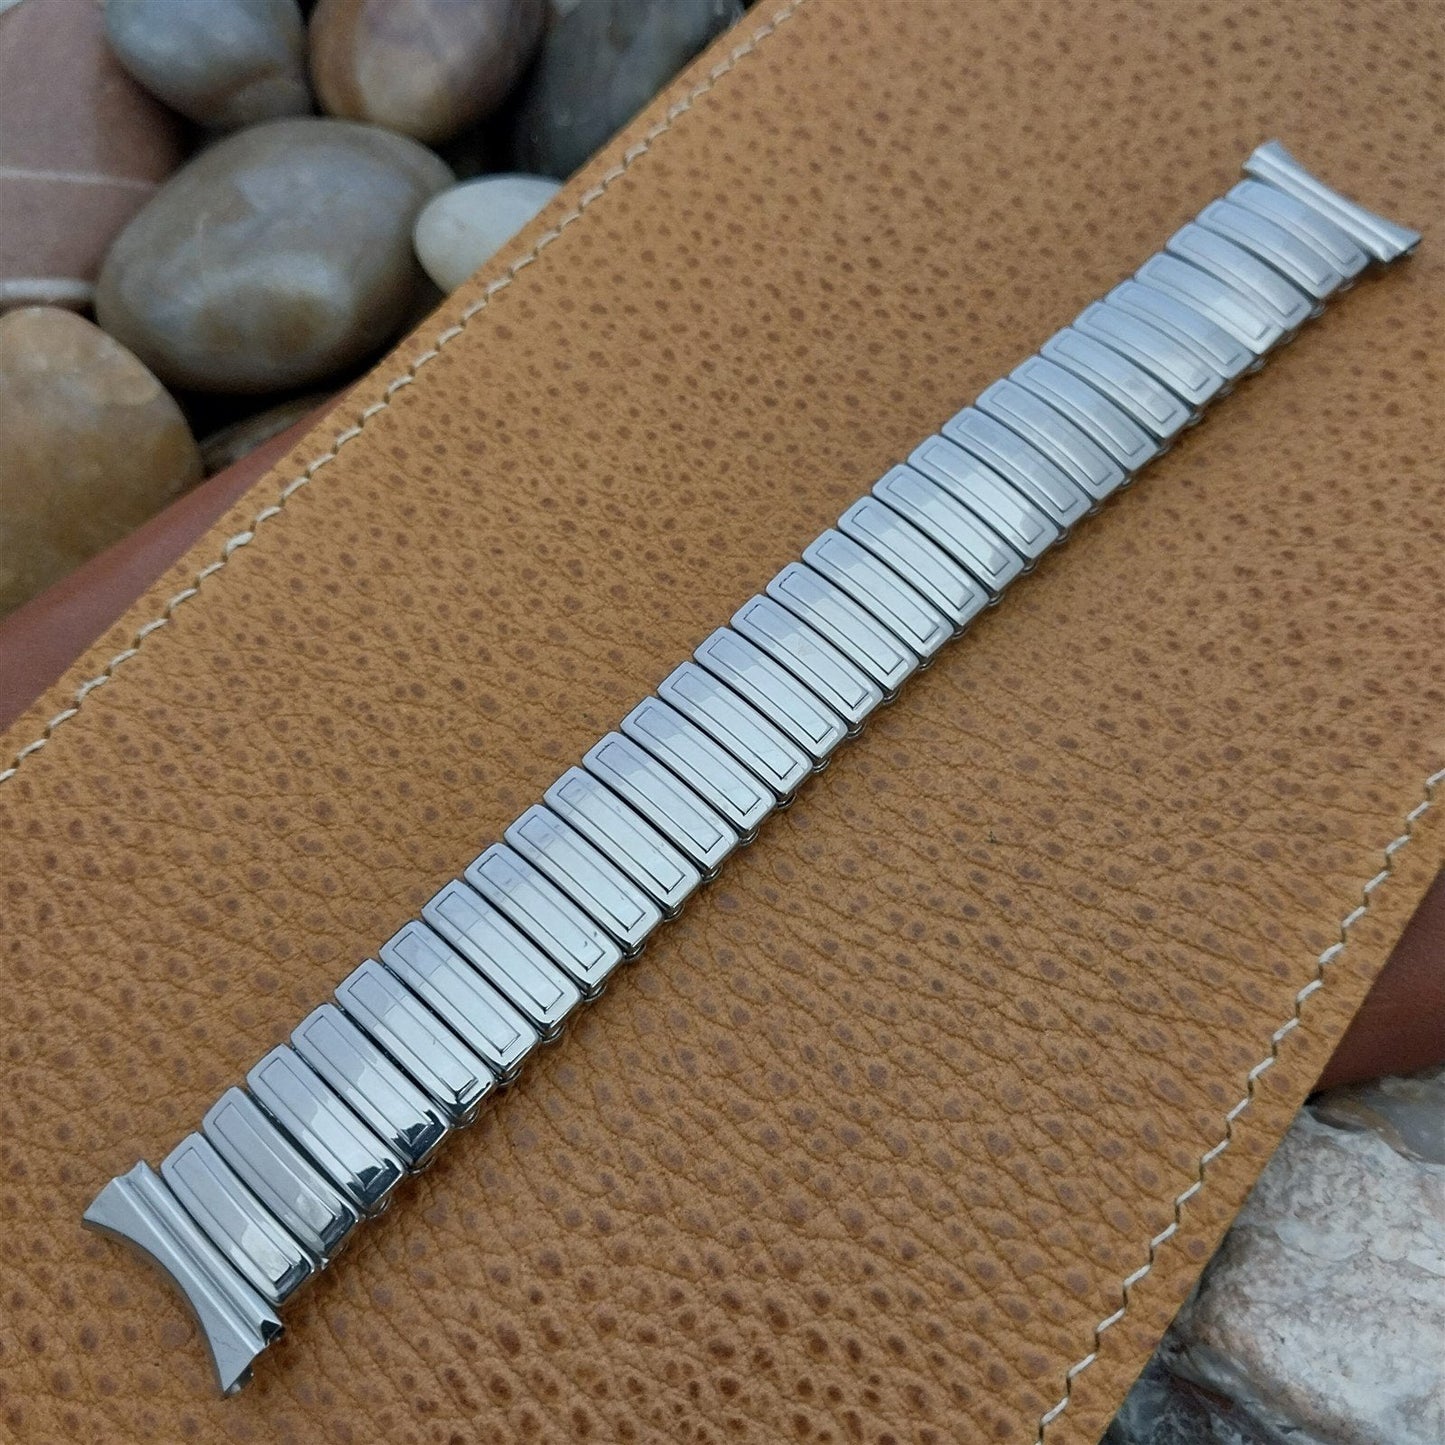 19mm 18mm 16mm 18-8 Stainless Steel JB Champion Classic 1950s Vintage Watch Band